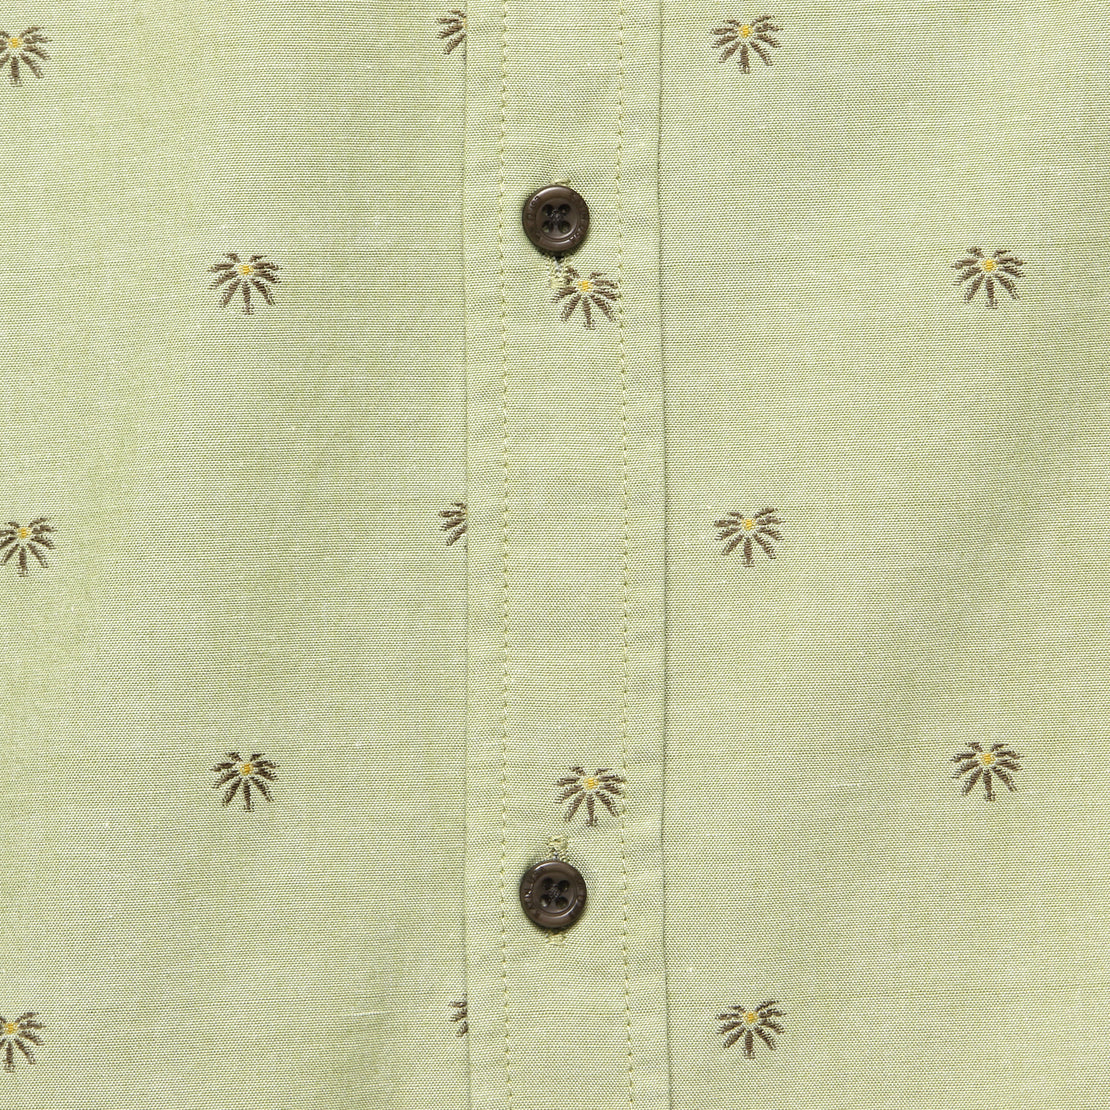 Agave Shirt - Pimento - Katin - STAG Provisions - Tops - S/S Woven - Dot